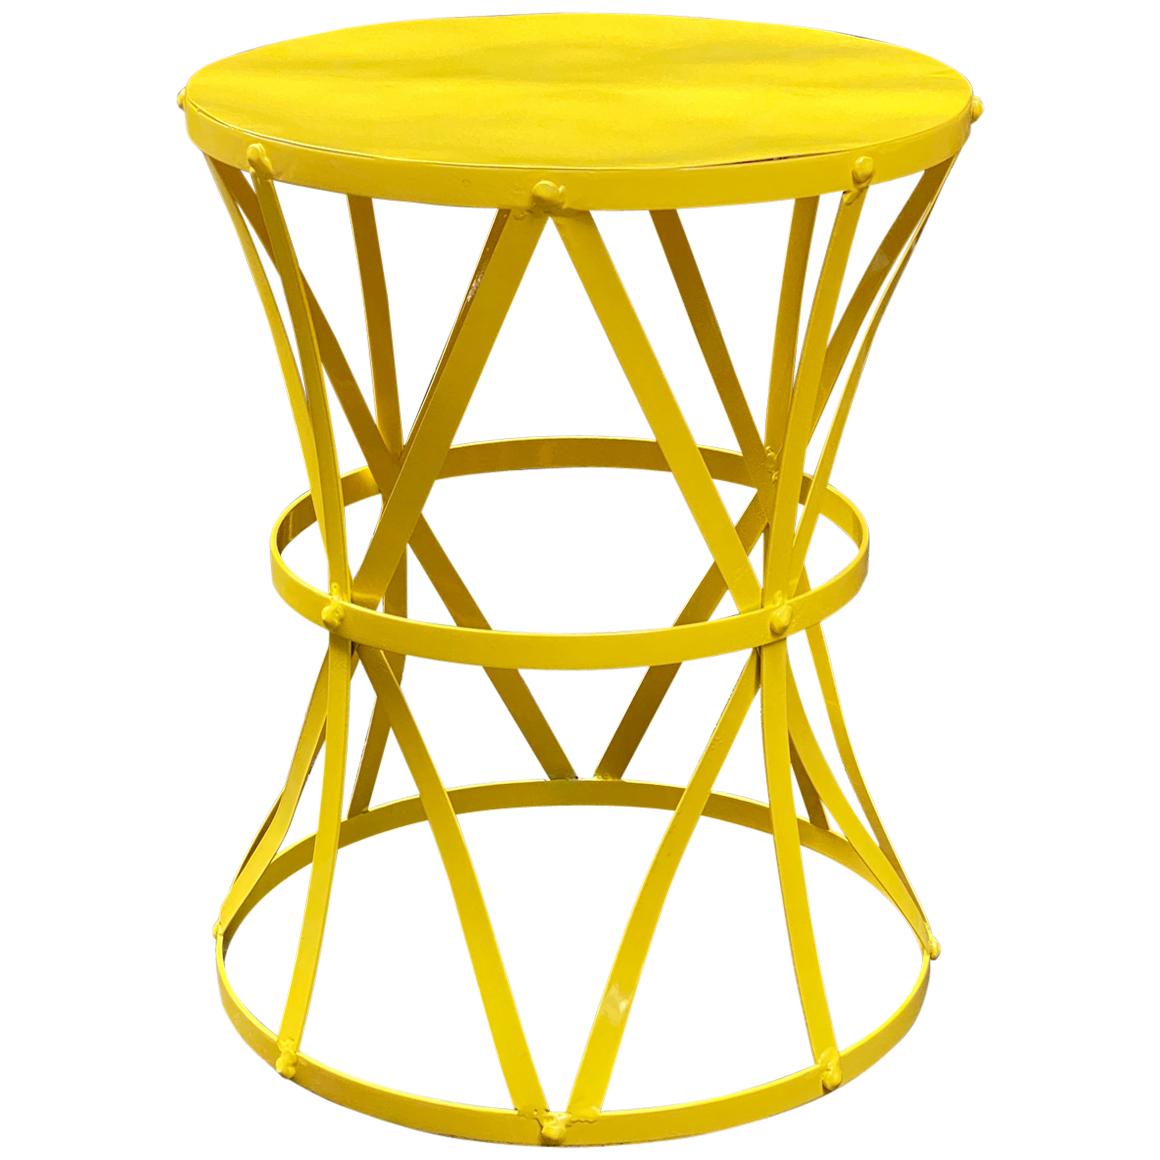 Strap Metal Canary Yellow Drum Table, 1960s For Sale